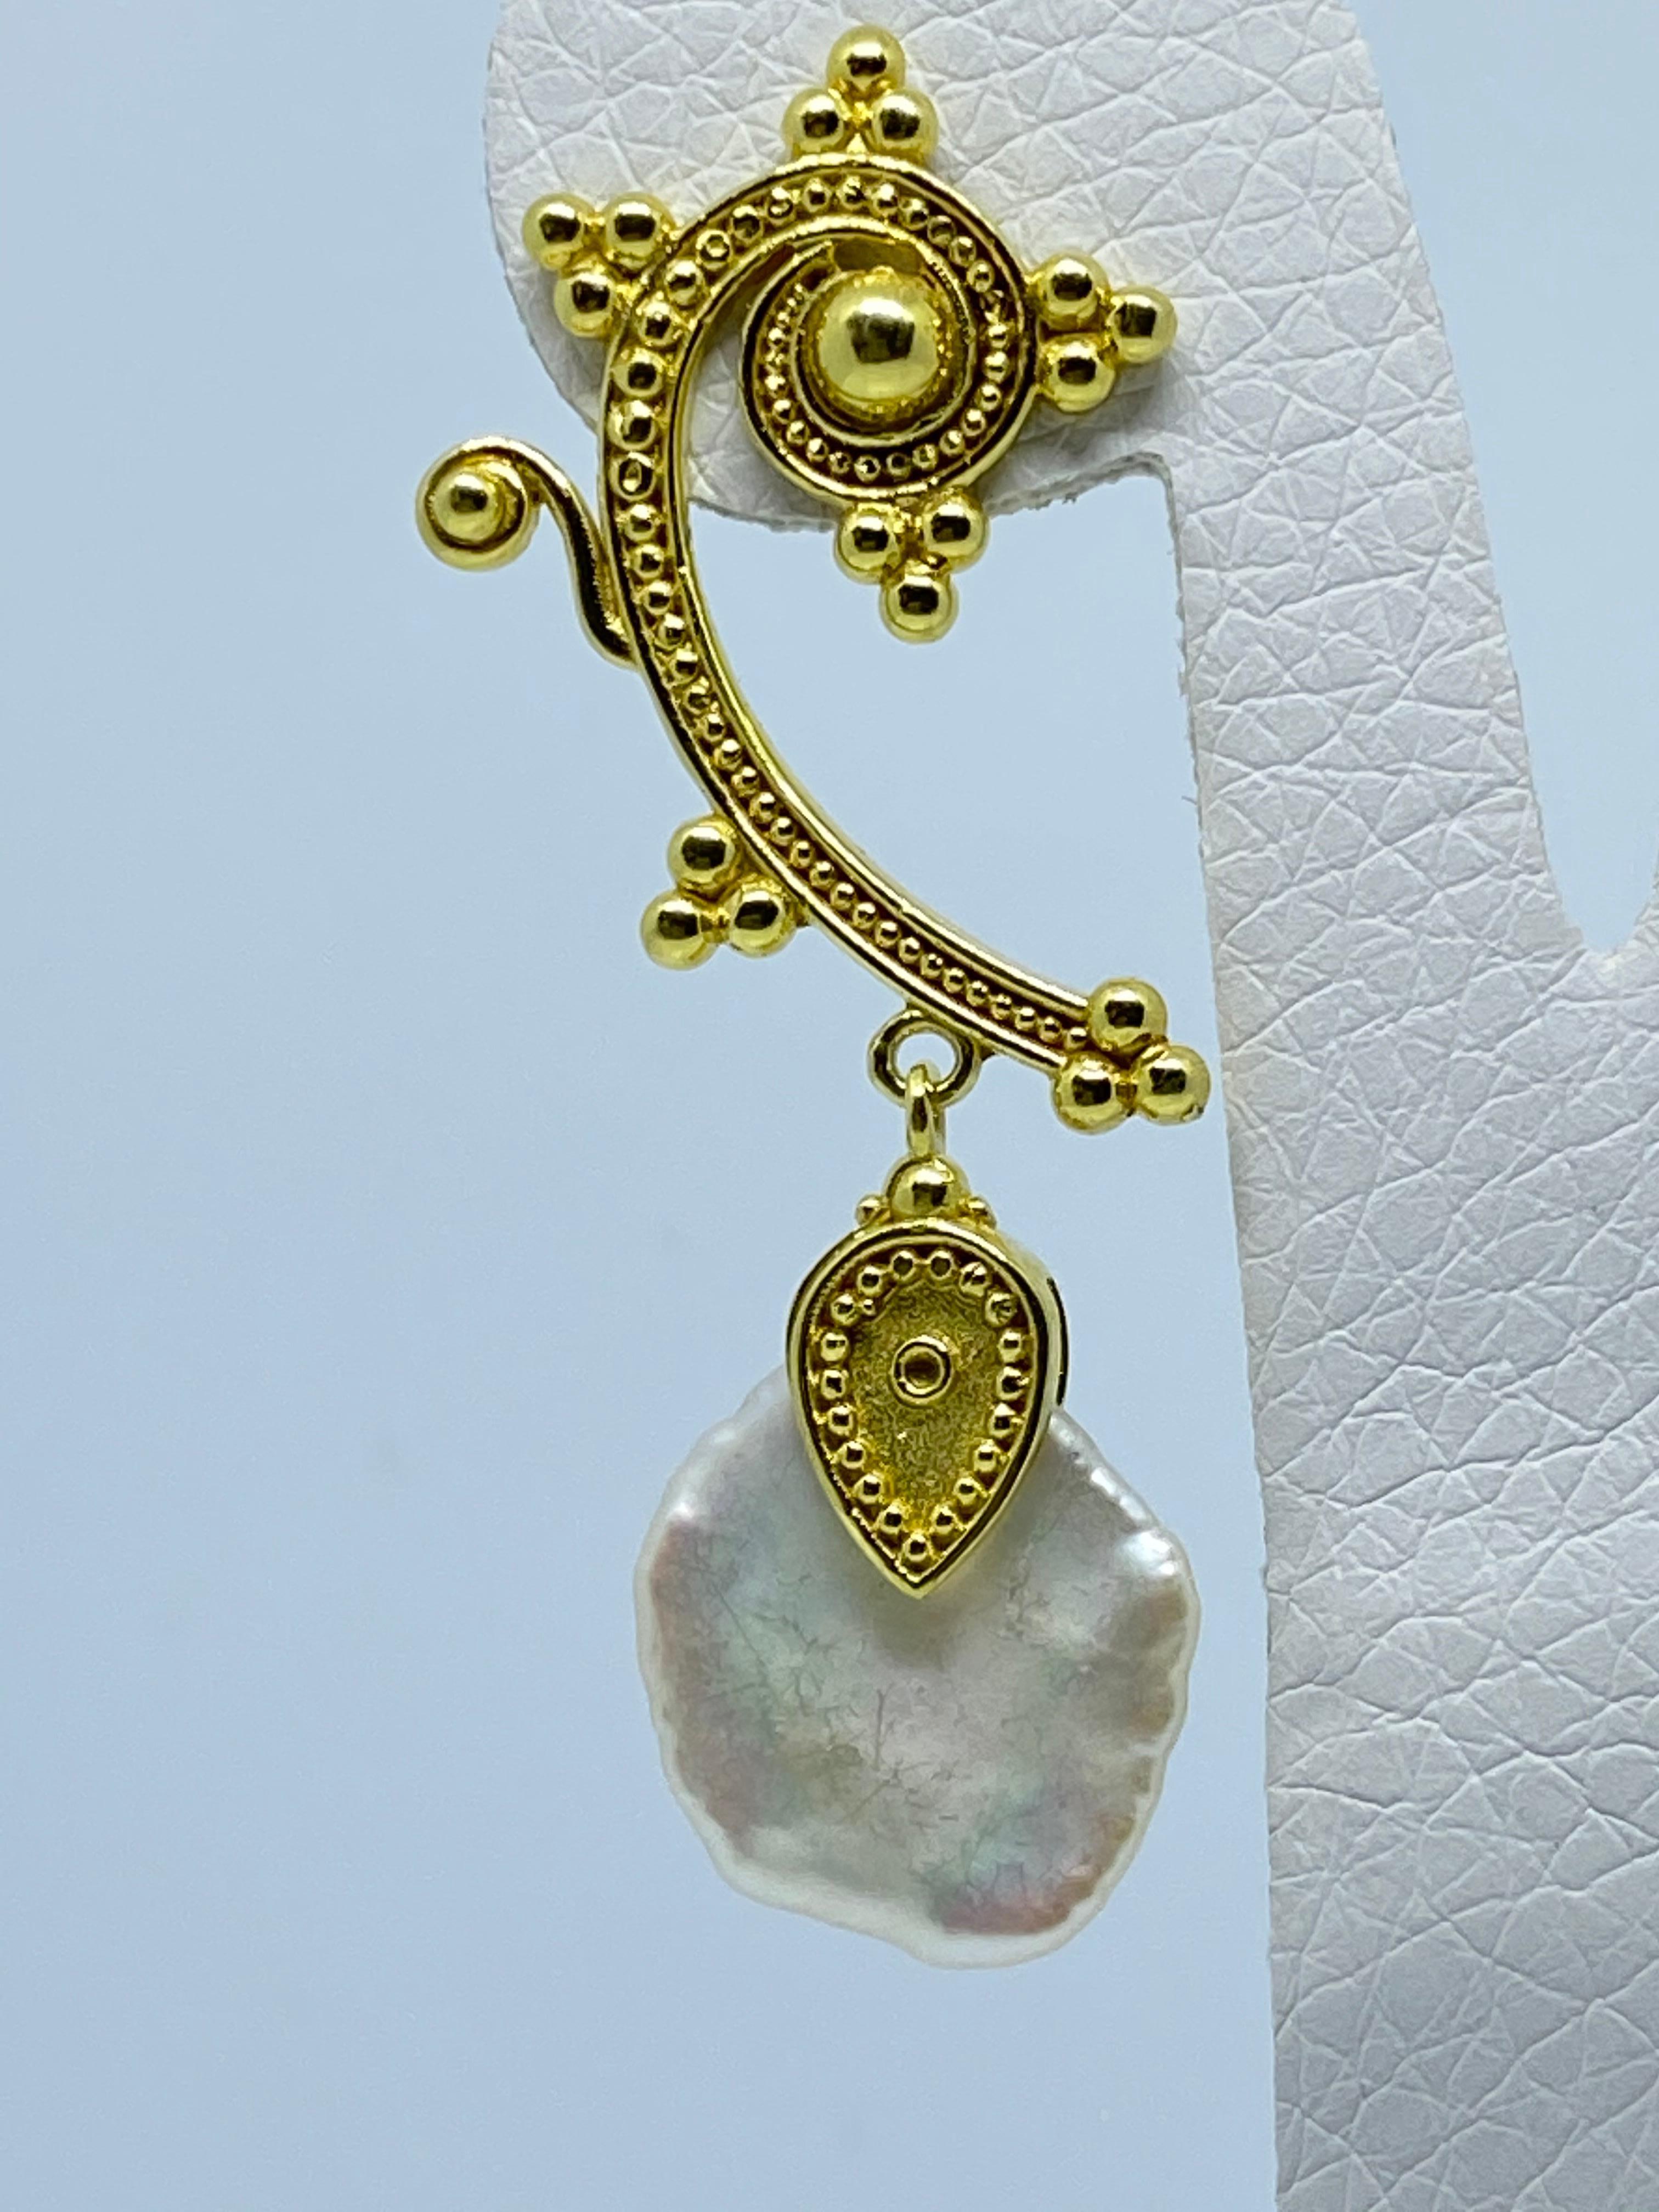 These S.Georgios designer earrings are hand made from 18 Karat Yellow Gold and are decorated with unique Byzantine-era style granulation workmanship in an elegant spiral finished with 2 beautiful Mother of Pearls. We also make this gorgeous pair of